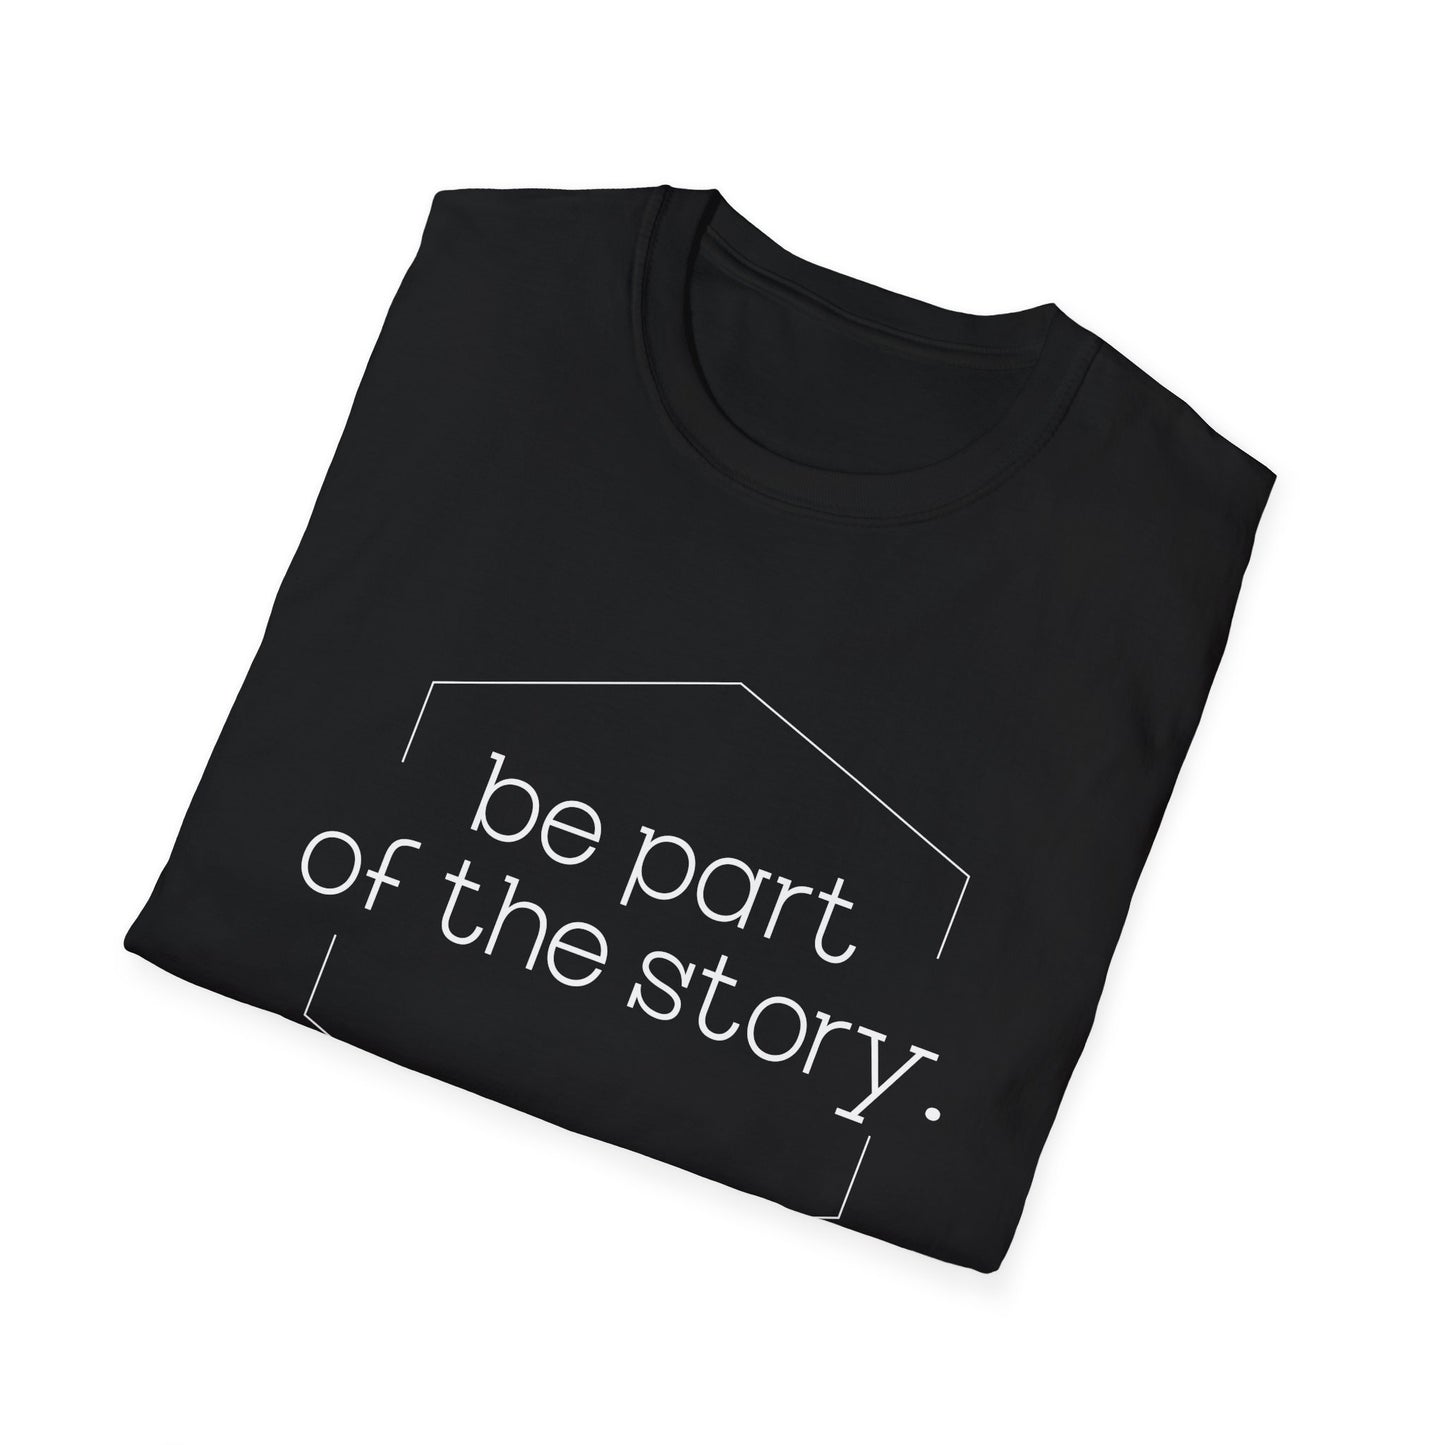 Be Part of the Story English Softstyle T-Shirt